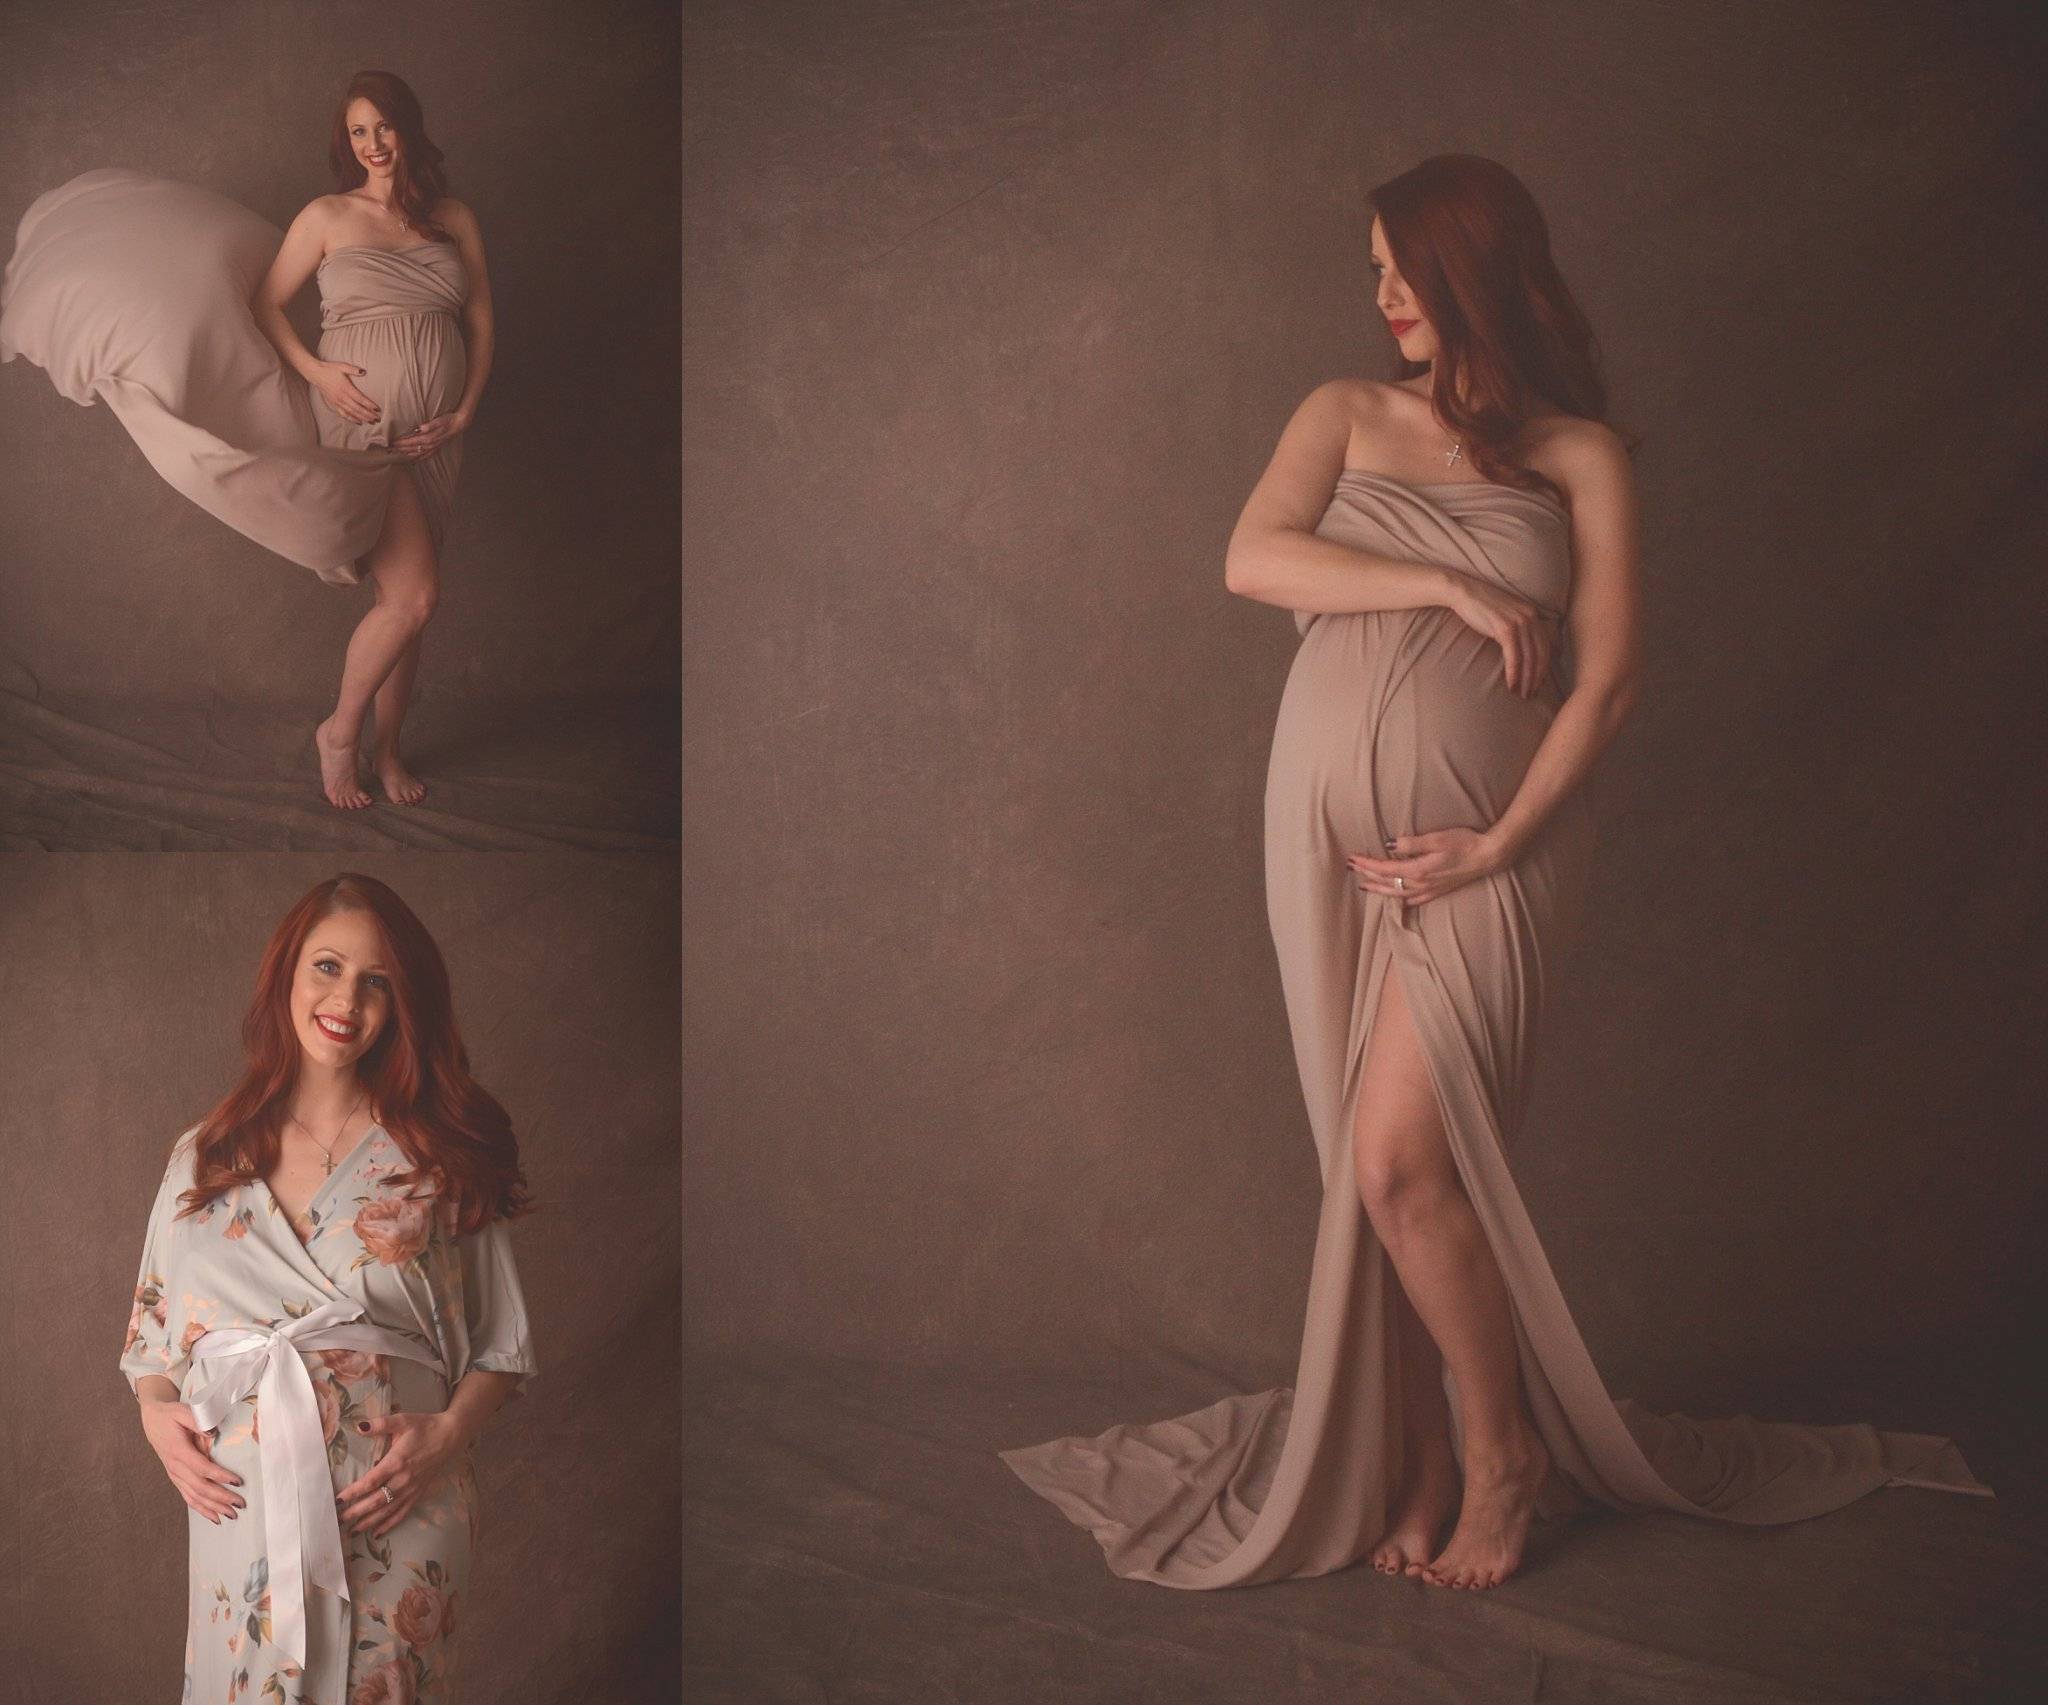 A pregnant woman is posing in different poses.